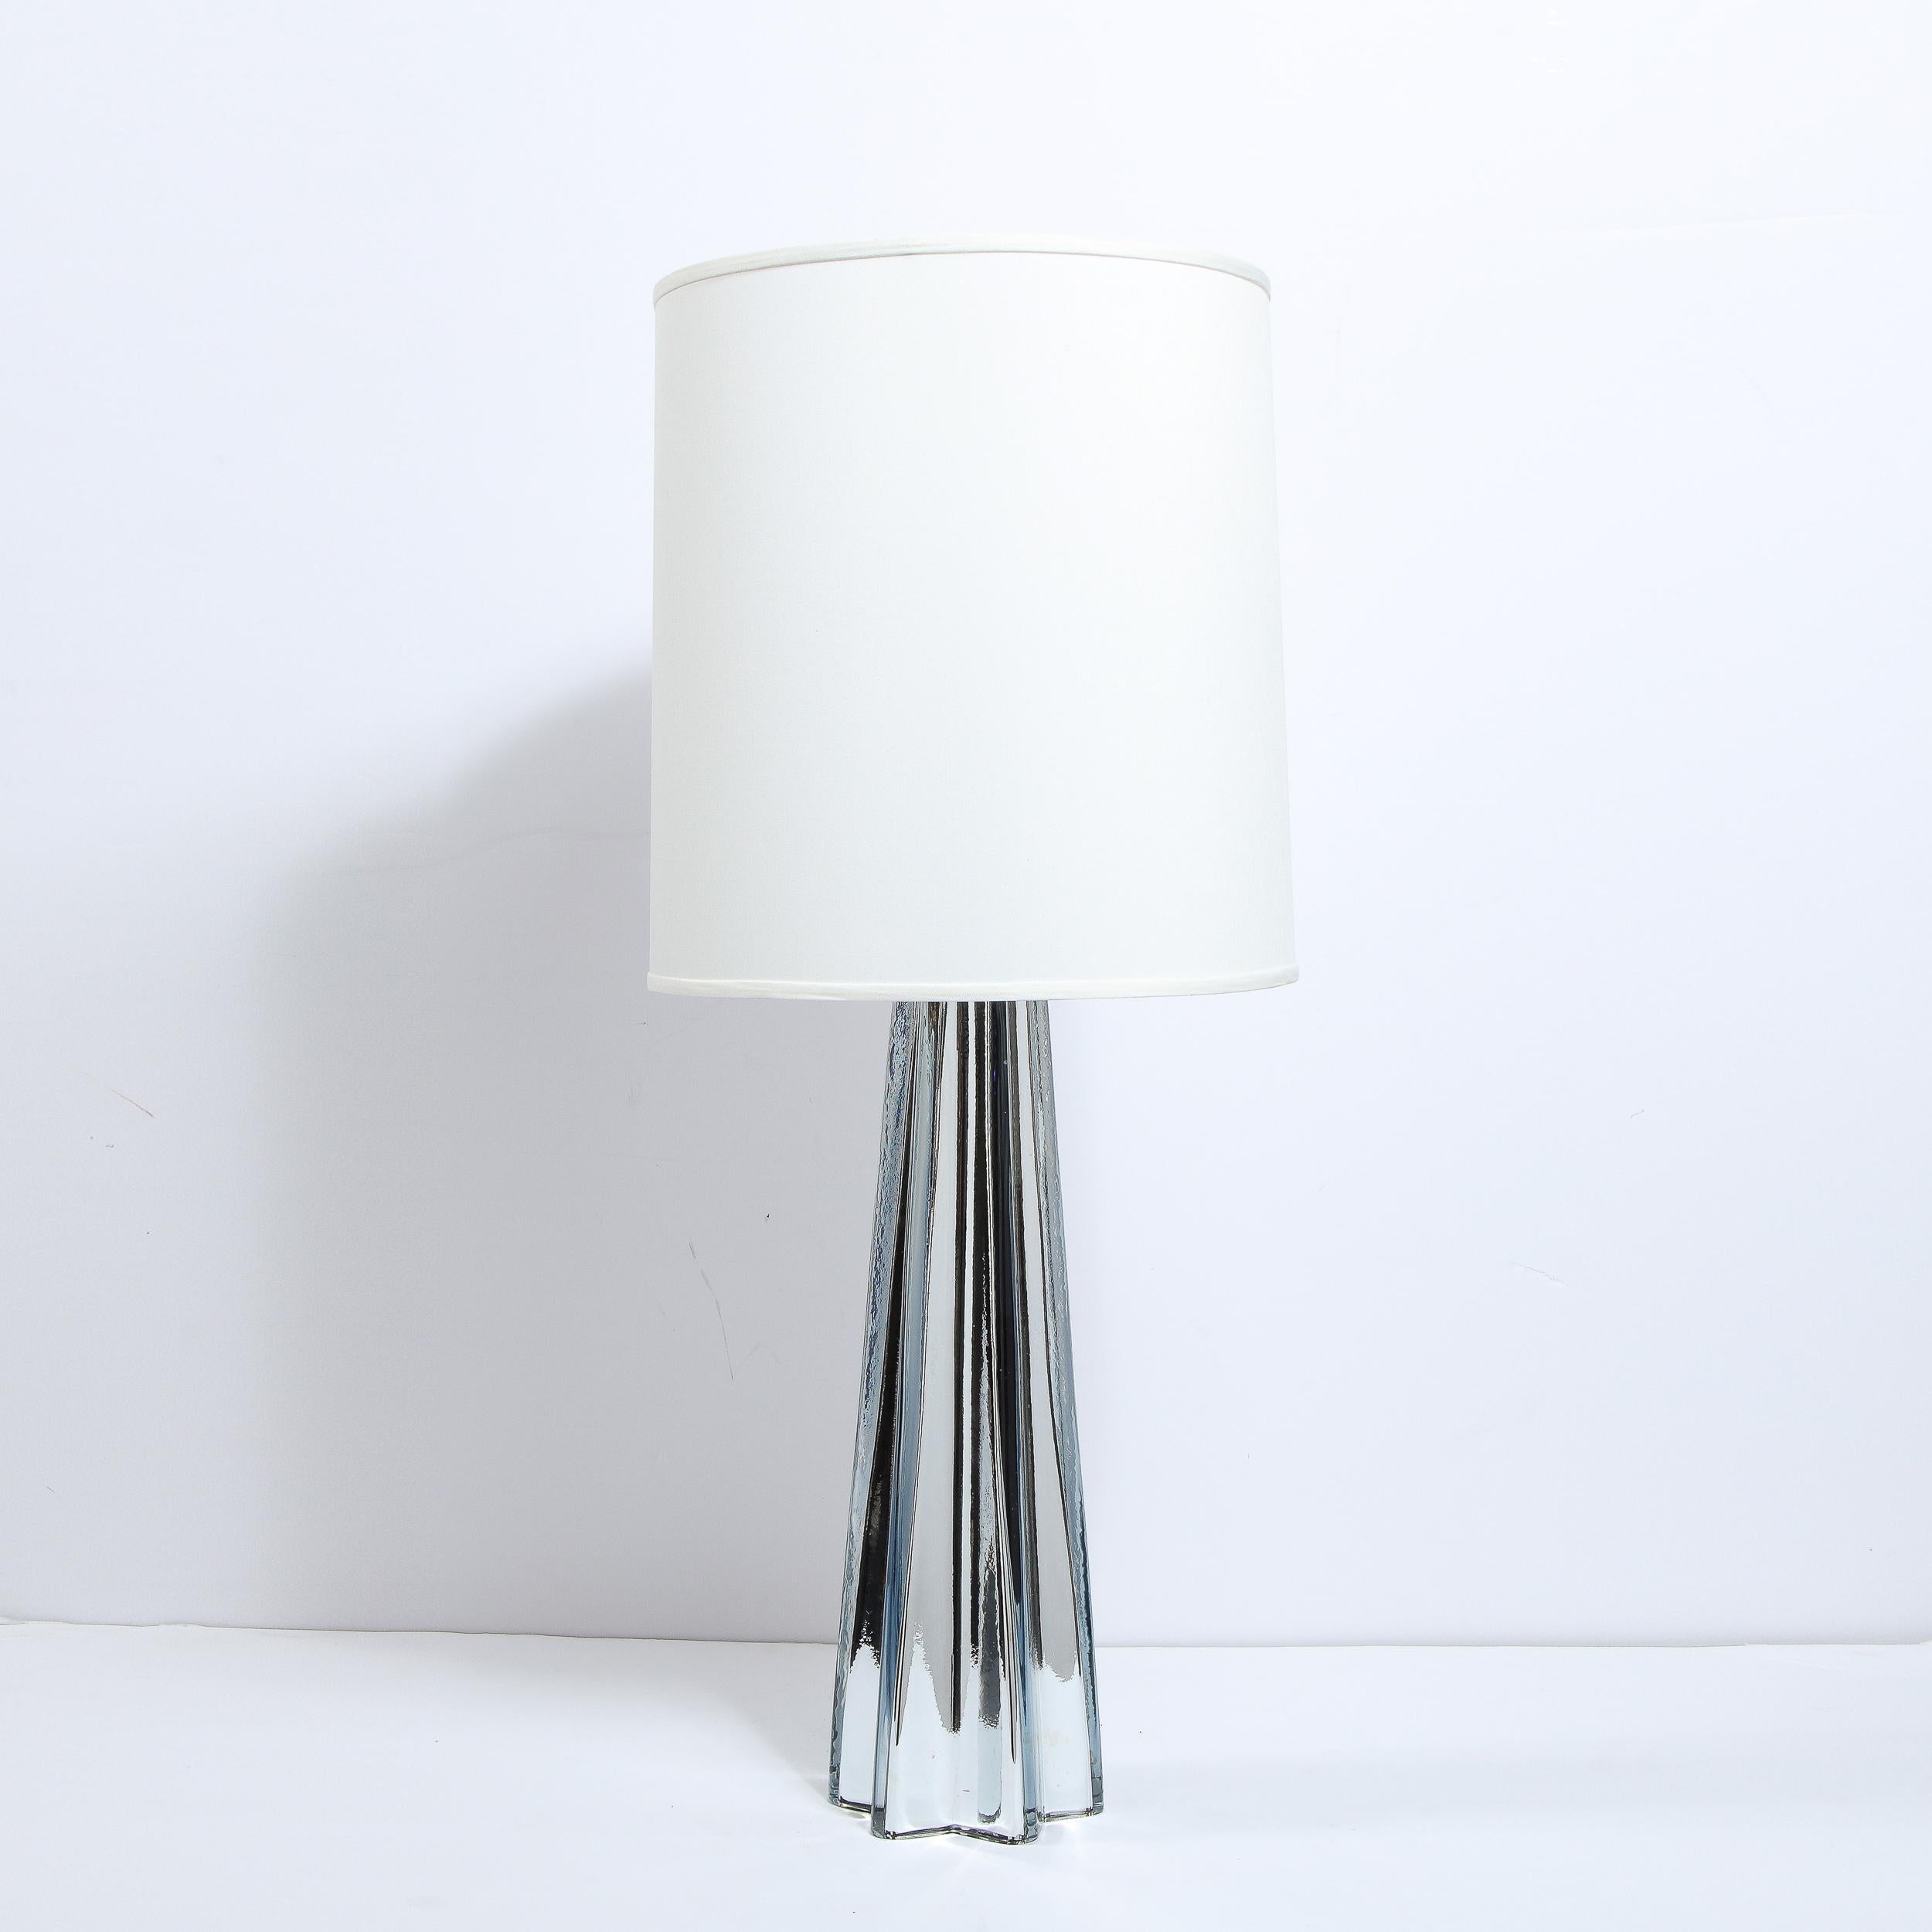 This elegant pair of table lamps were hand blown in Murano, Italy- the island off the coast of Venice renowned for centuries for its superlative glass production. They feature tapered stylized x-form bodies with subtly concave sides that connect the